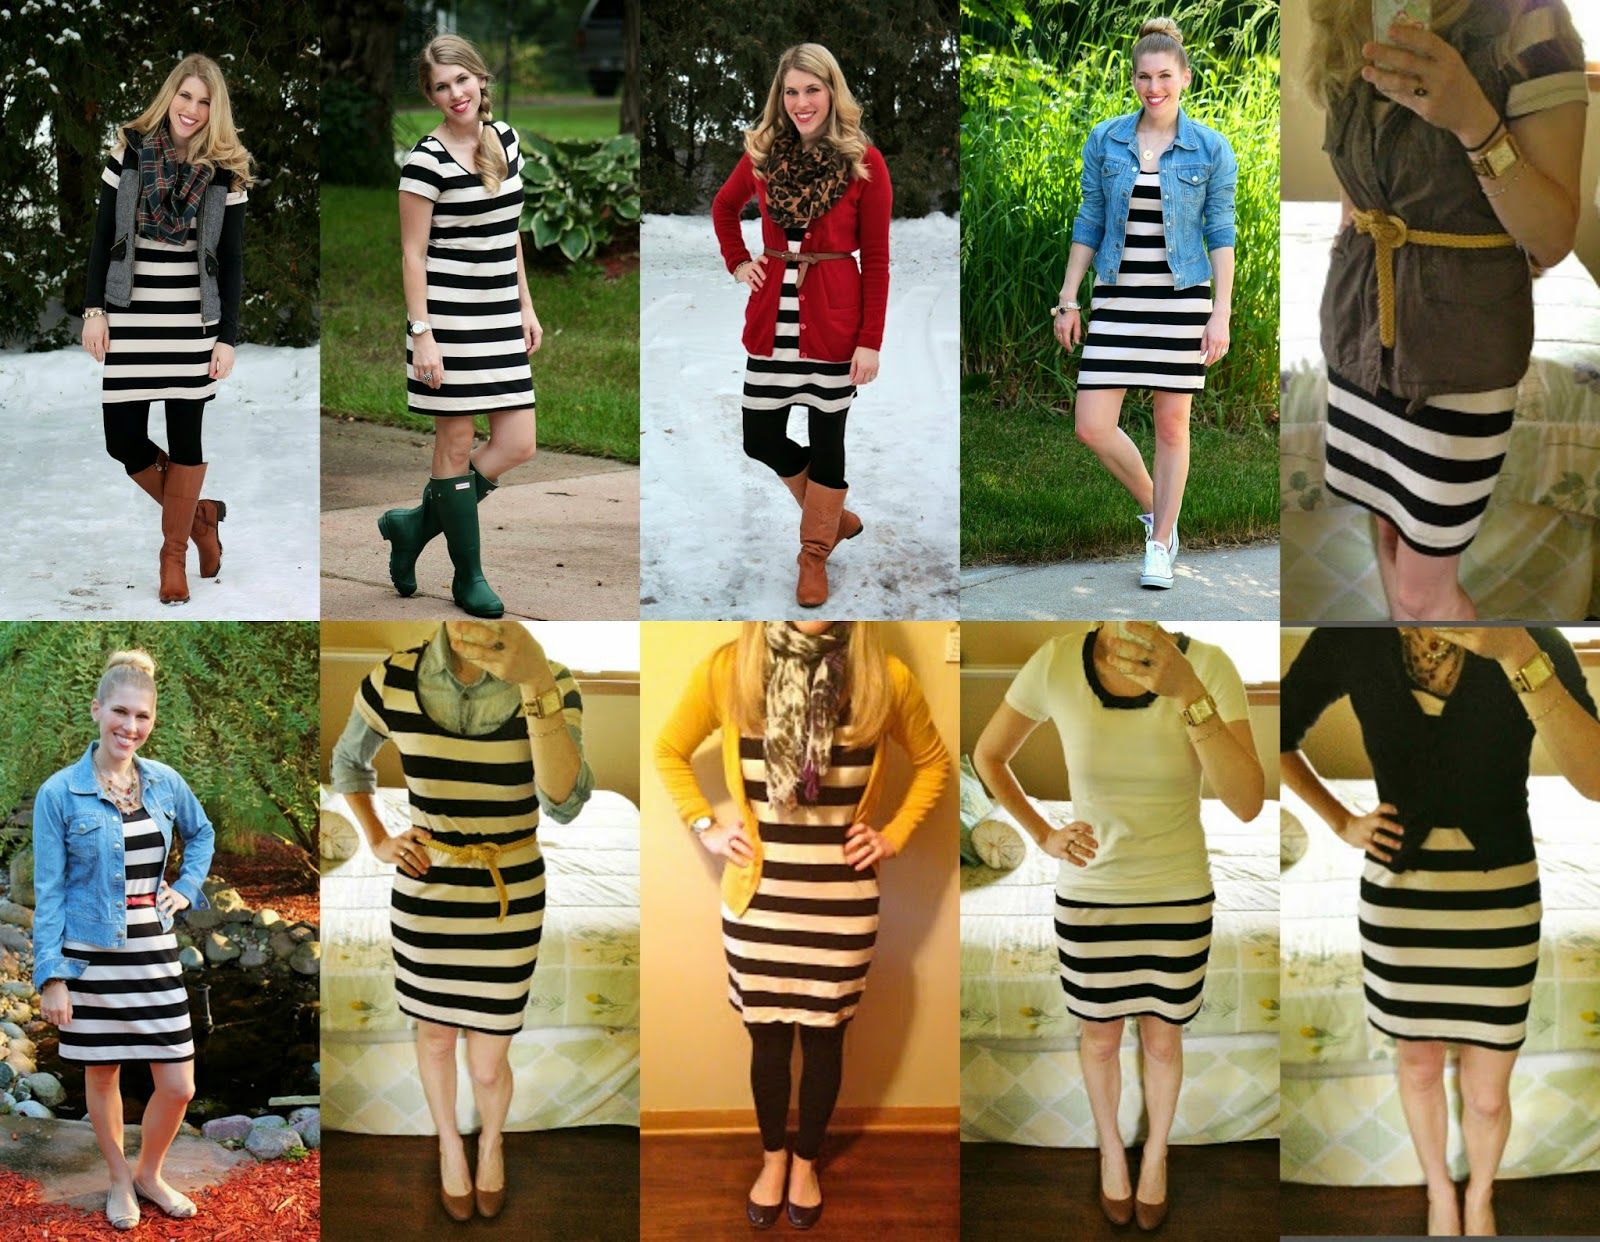 How To Wear Black And White Striped Dress